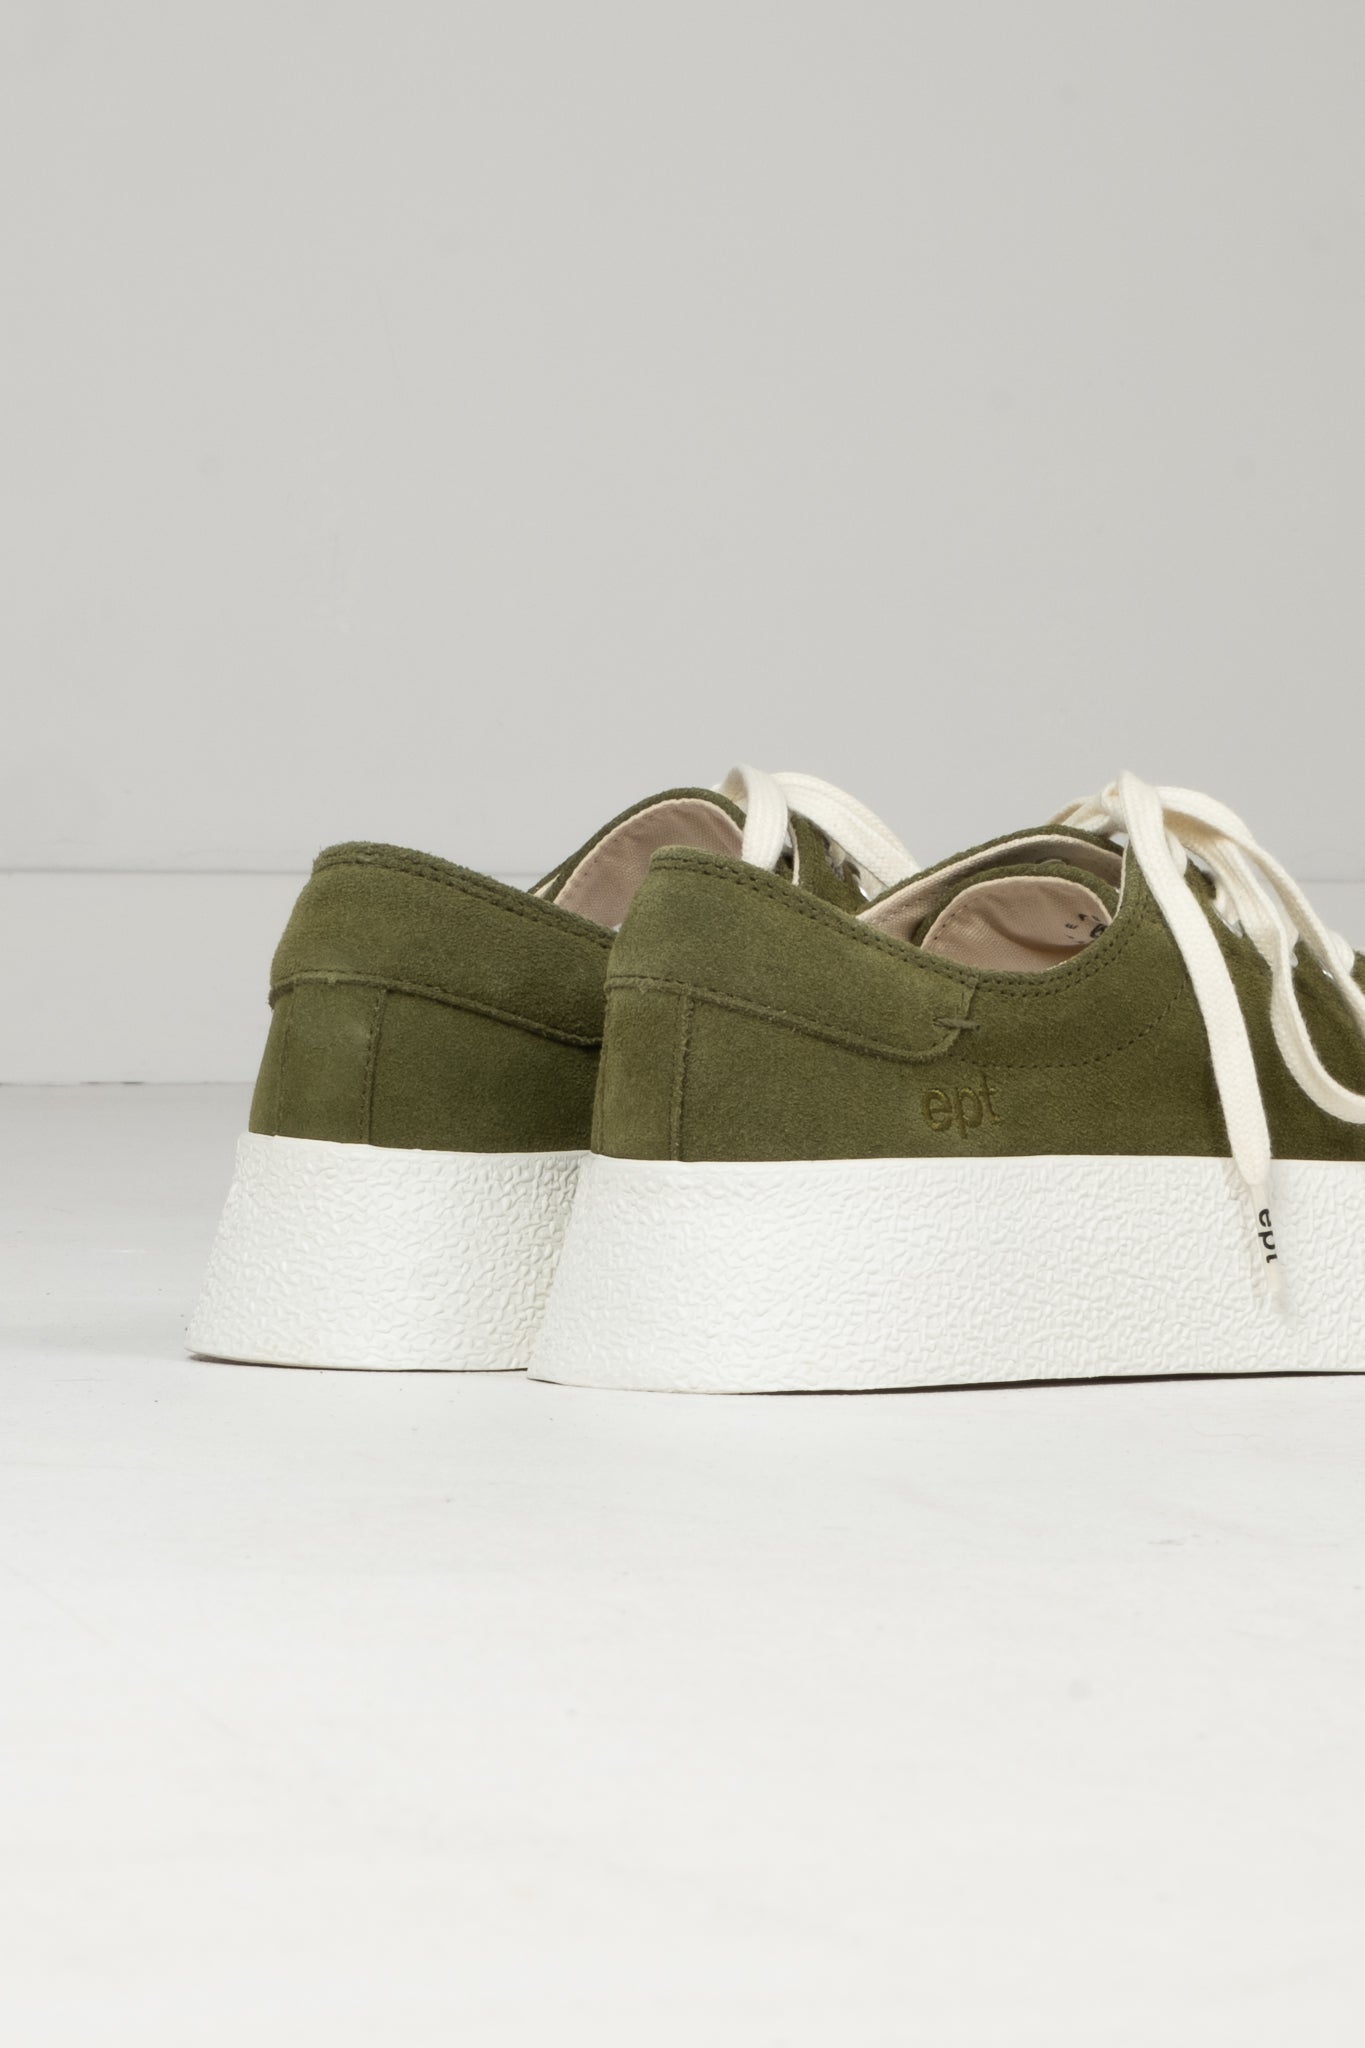 'Dive' Suede - Olive